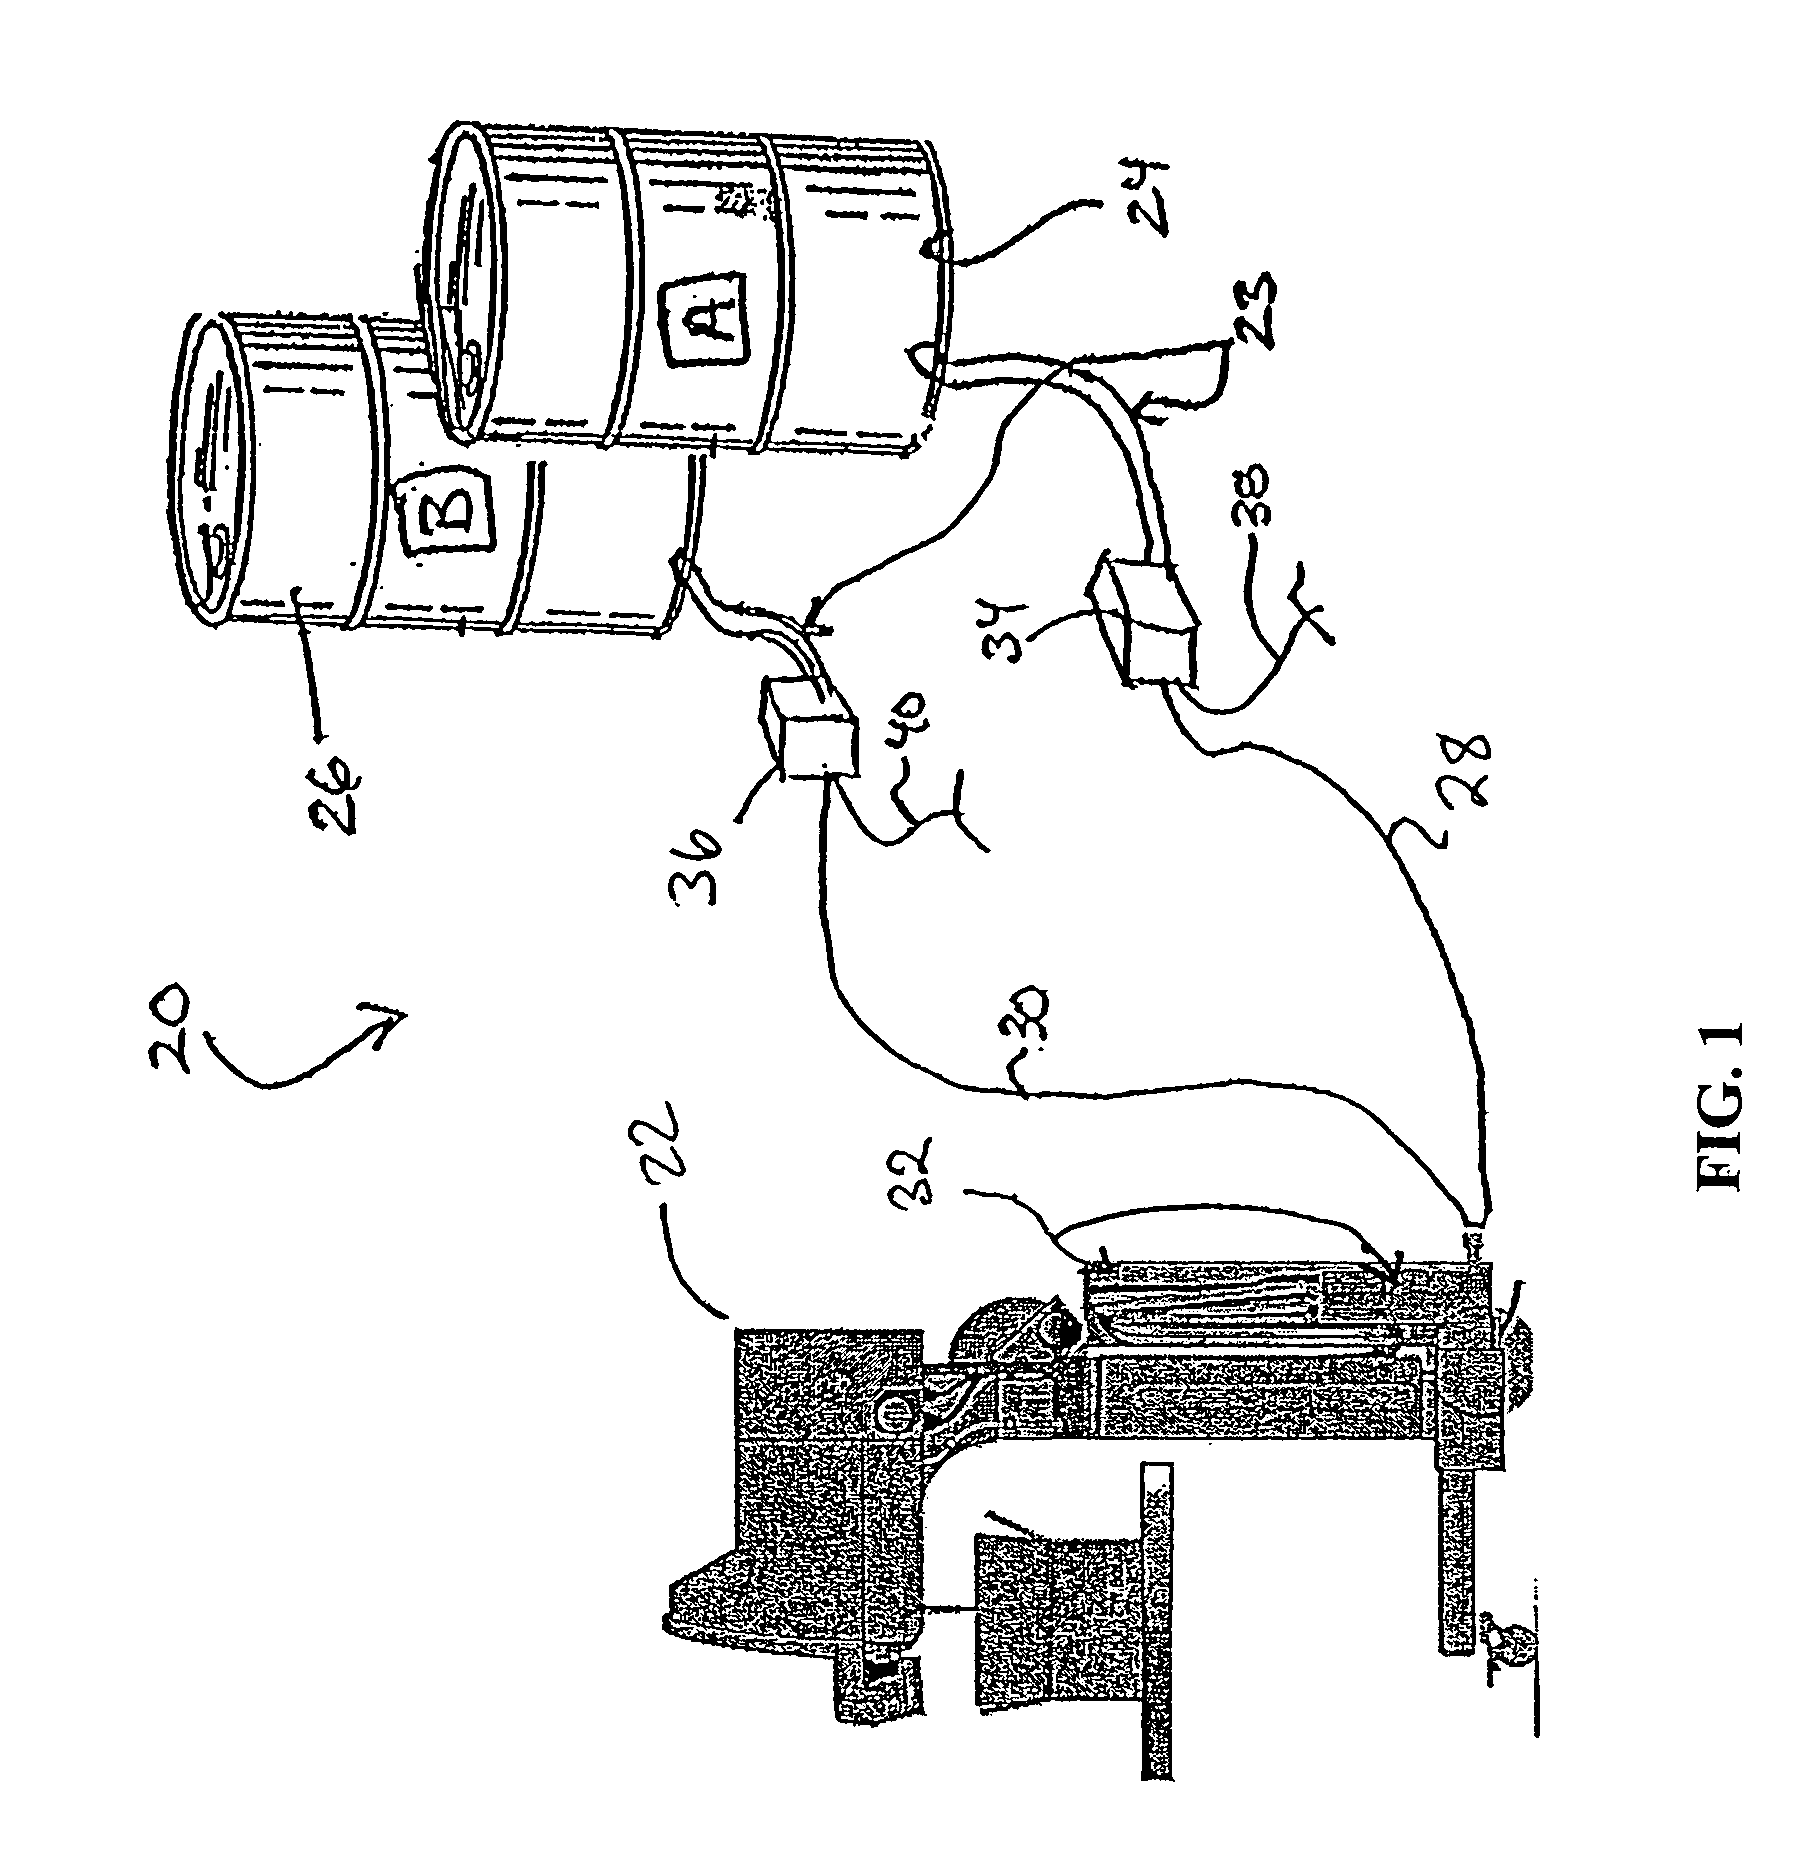 Dispensing system with end sealer assembly and method of manufacturing and using same